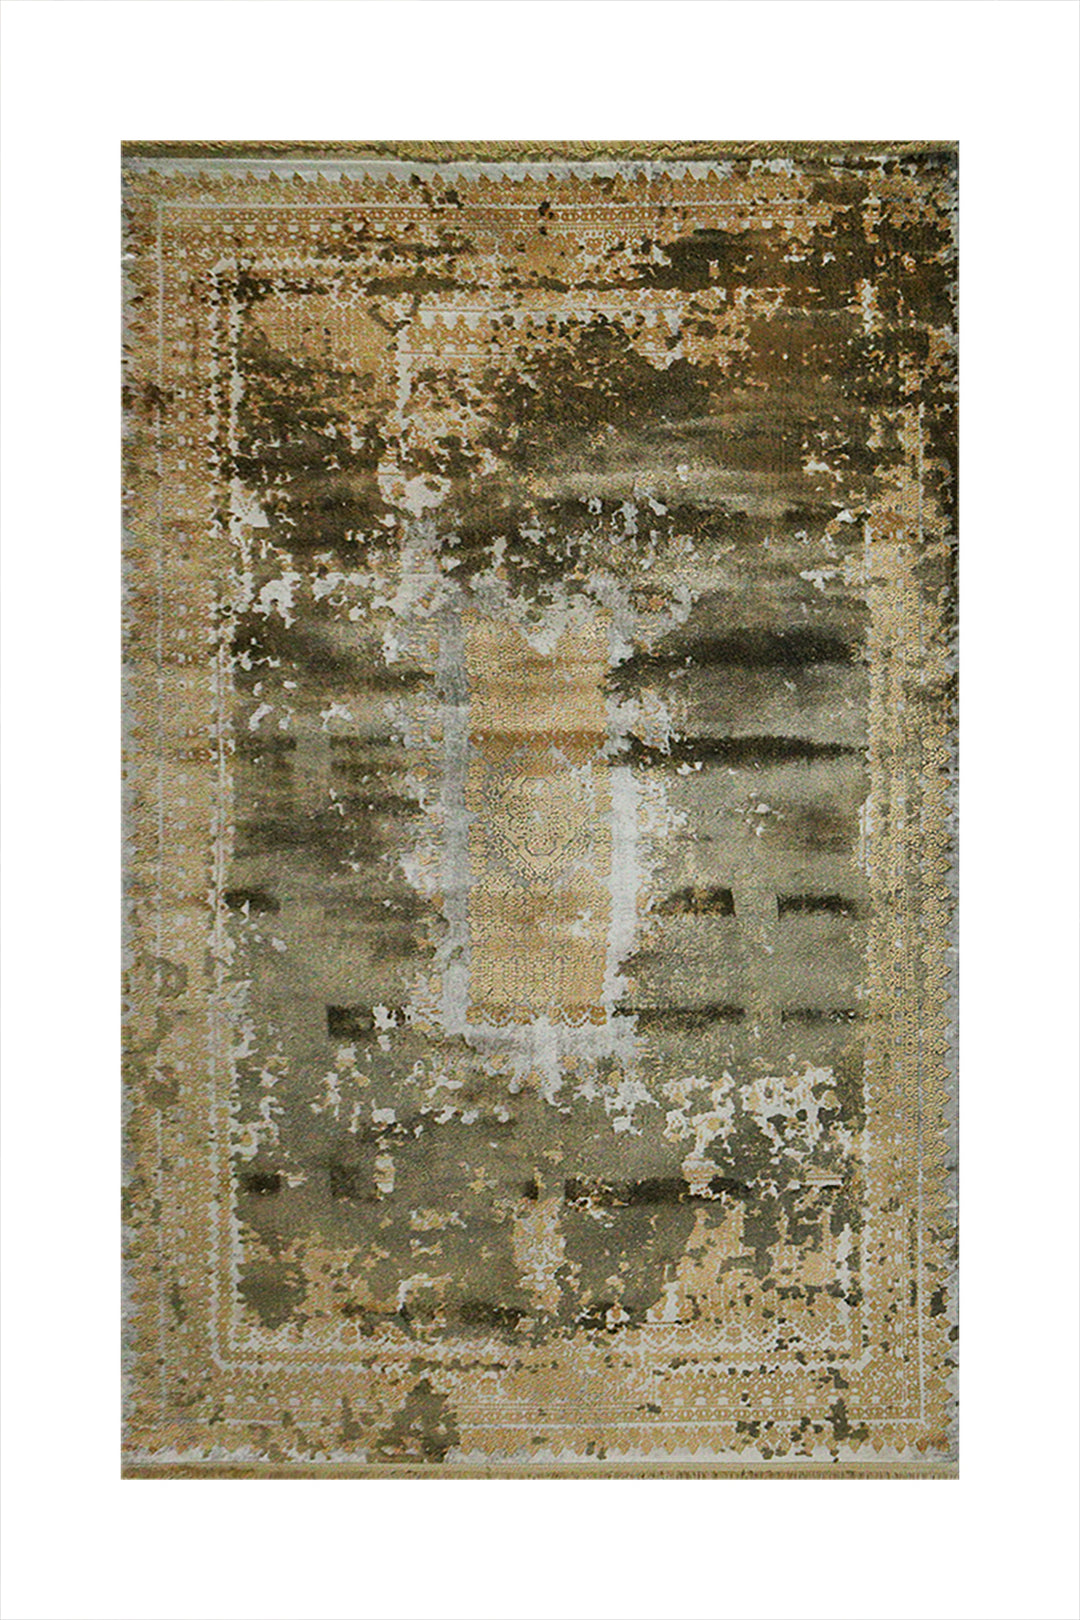 Turkish Premium Quality Voyage Rug - 5.2 x 7.5 FT - Gray - Resilient Construction for Long-Lasting Use